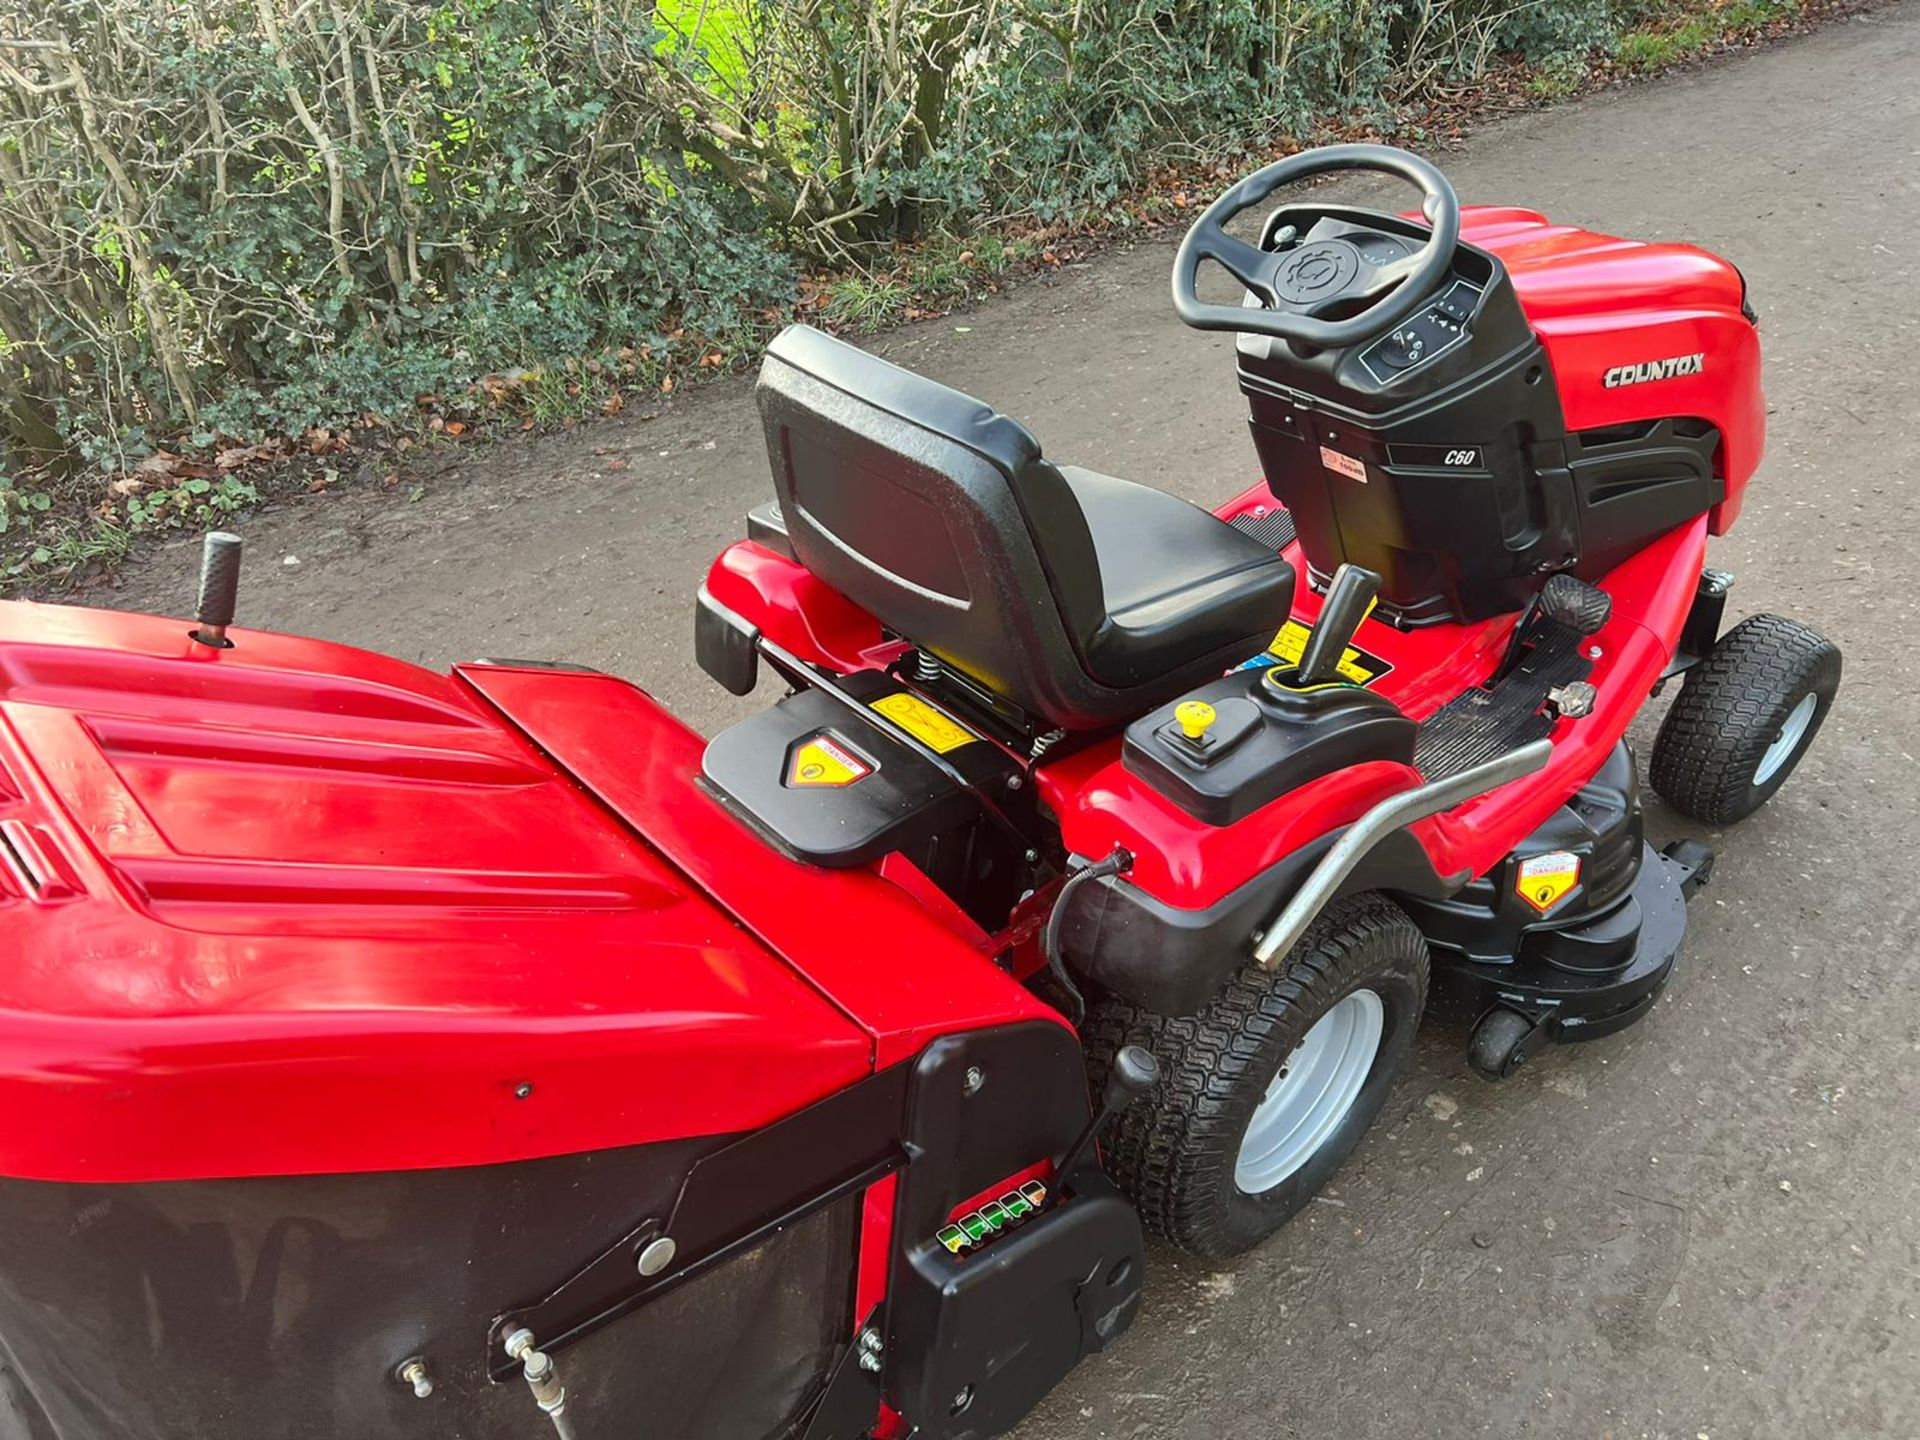 2016 WESTWOOD/COUNTAX 60 RIDE ON LAWN MOWER WITH PGC, SHOWING A LOW 102 HOURS *NO VAT* - Image 7 of 8